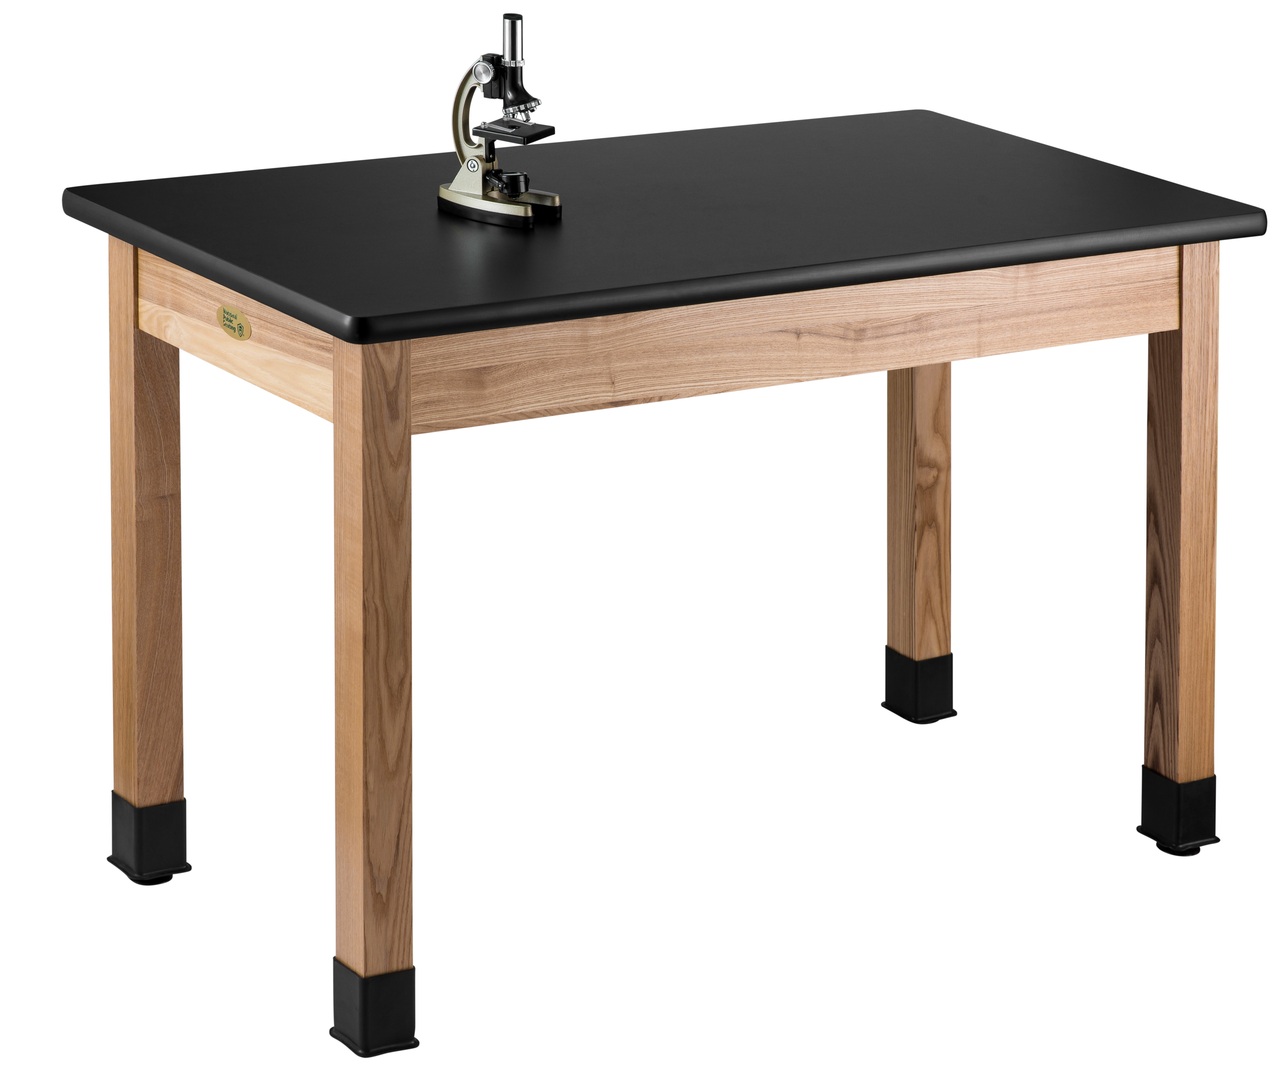 NPS Wood Science Lab Table -  24"x60"x30" -  HPL Top - Black Top and Ash Leg